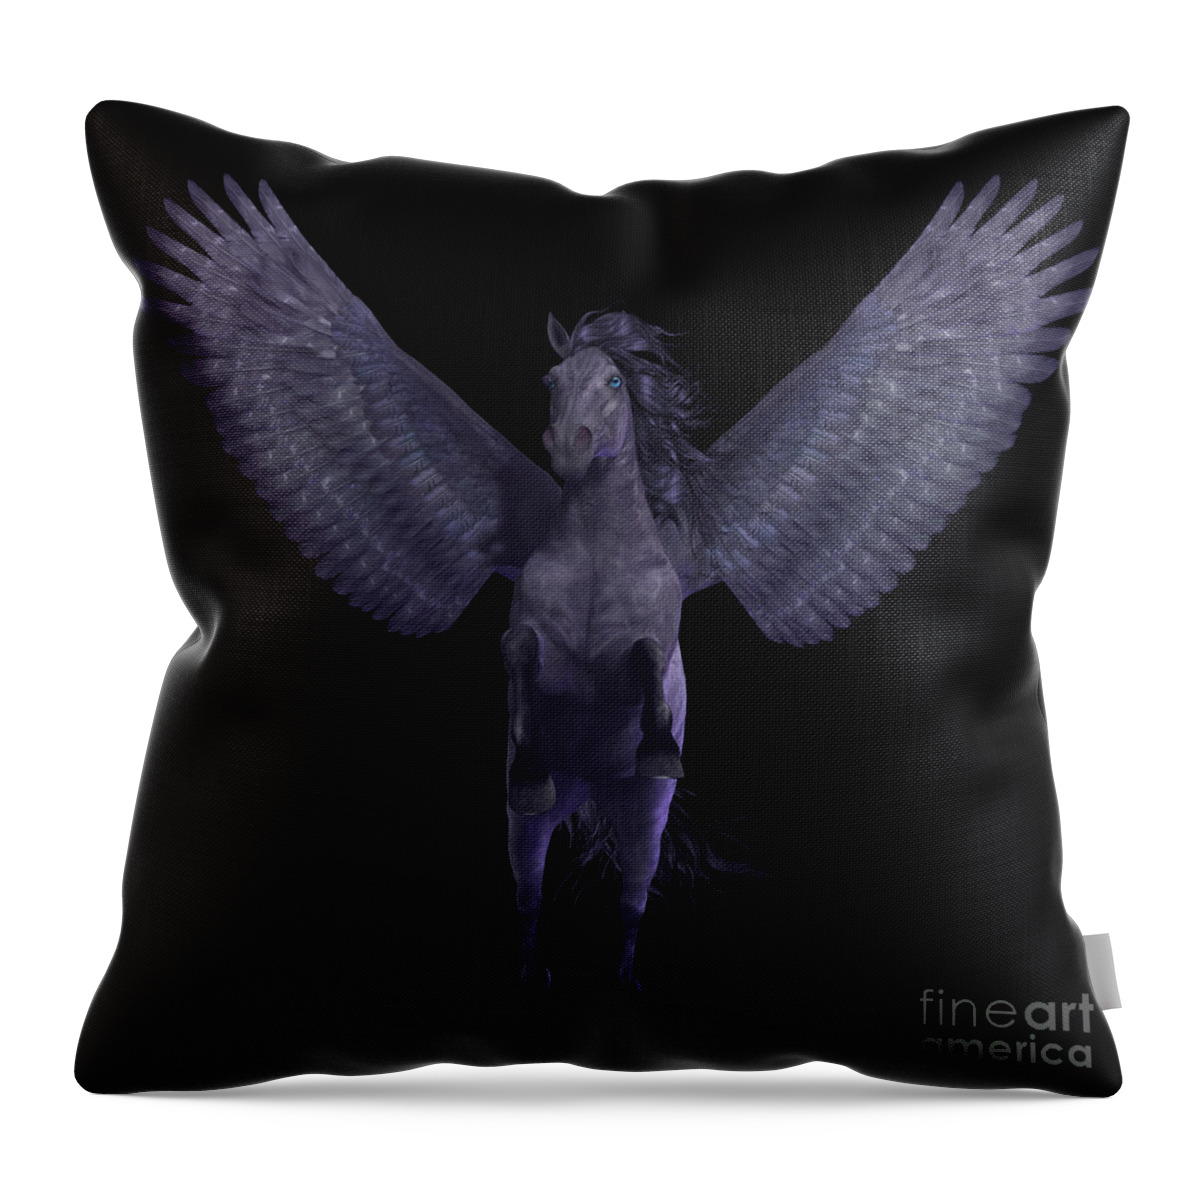 Pegasus Throw Pillow featuring the painting Black Pegasus on Black by Corey Ford